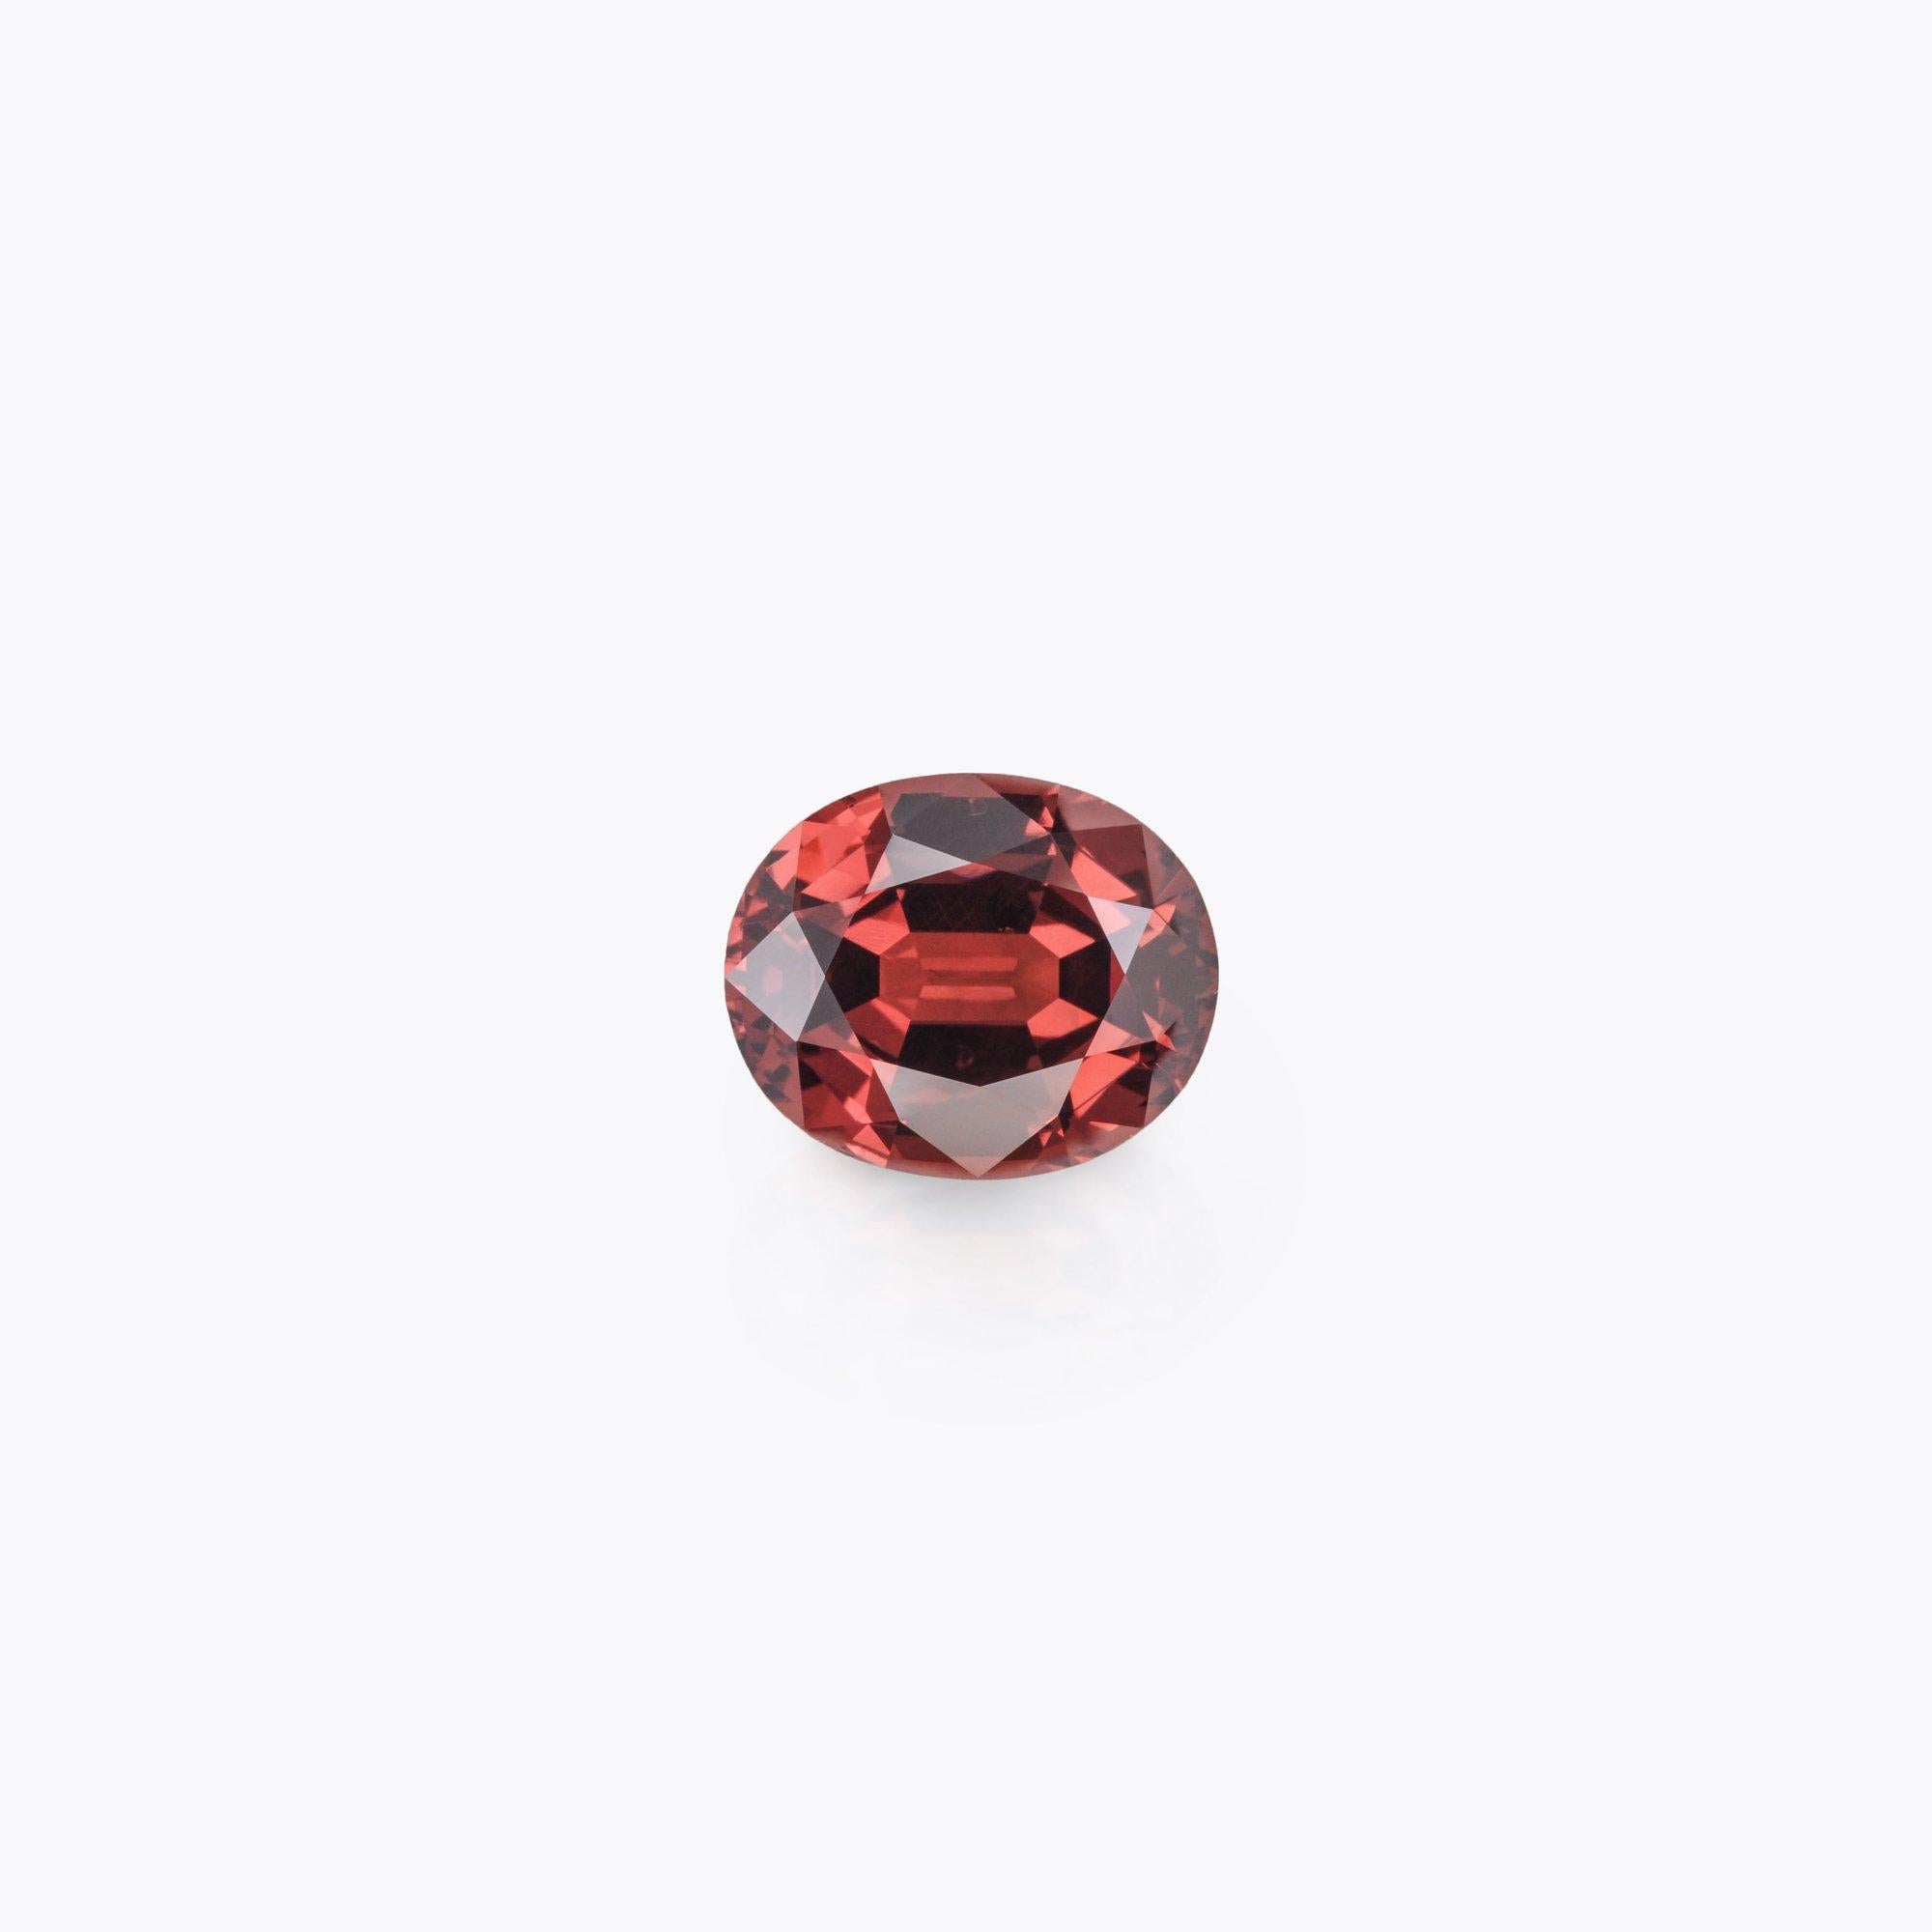 7.57 carat Malaya Garnet oval gem offered loose to a lady or gentleman.
Returns are accepted and paid by us within 7 days of delivery.
We offer supreme custom jewelry work upon request. Please contact us for more details.
(Rings, Earrings,